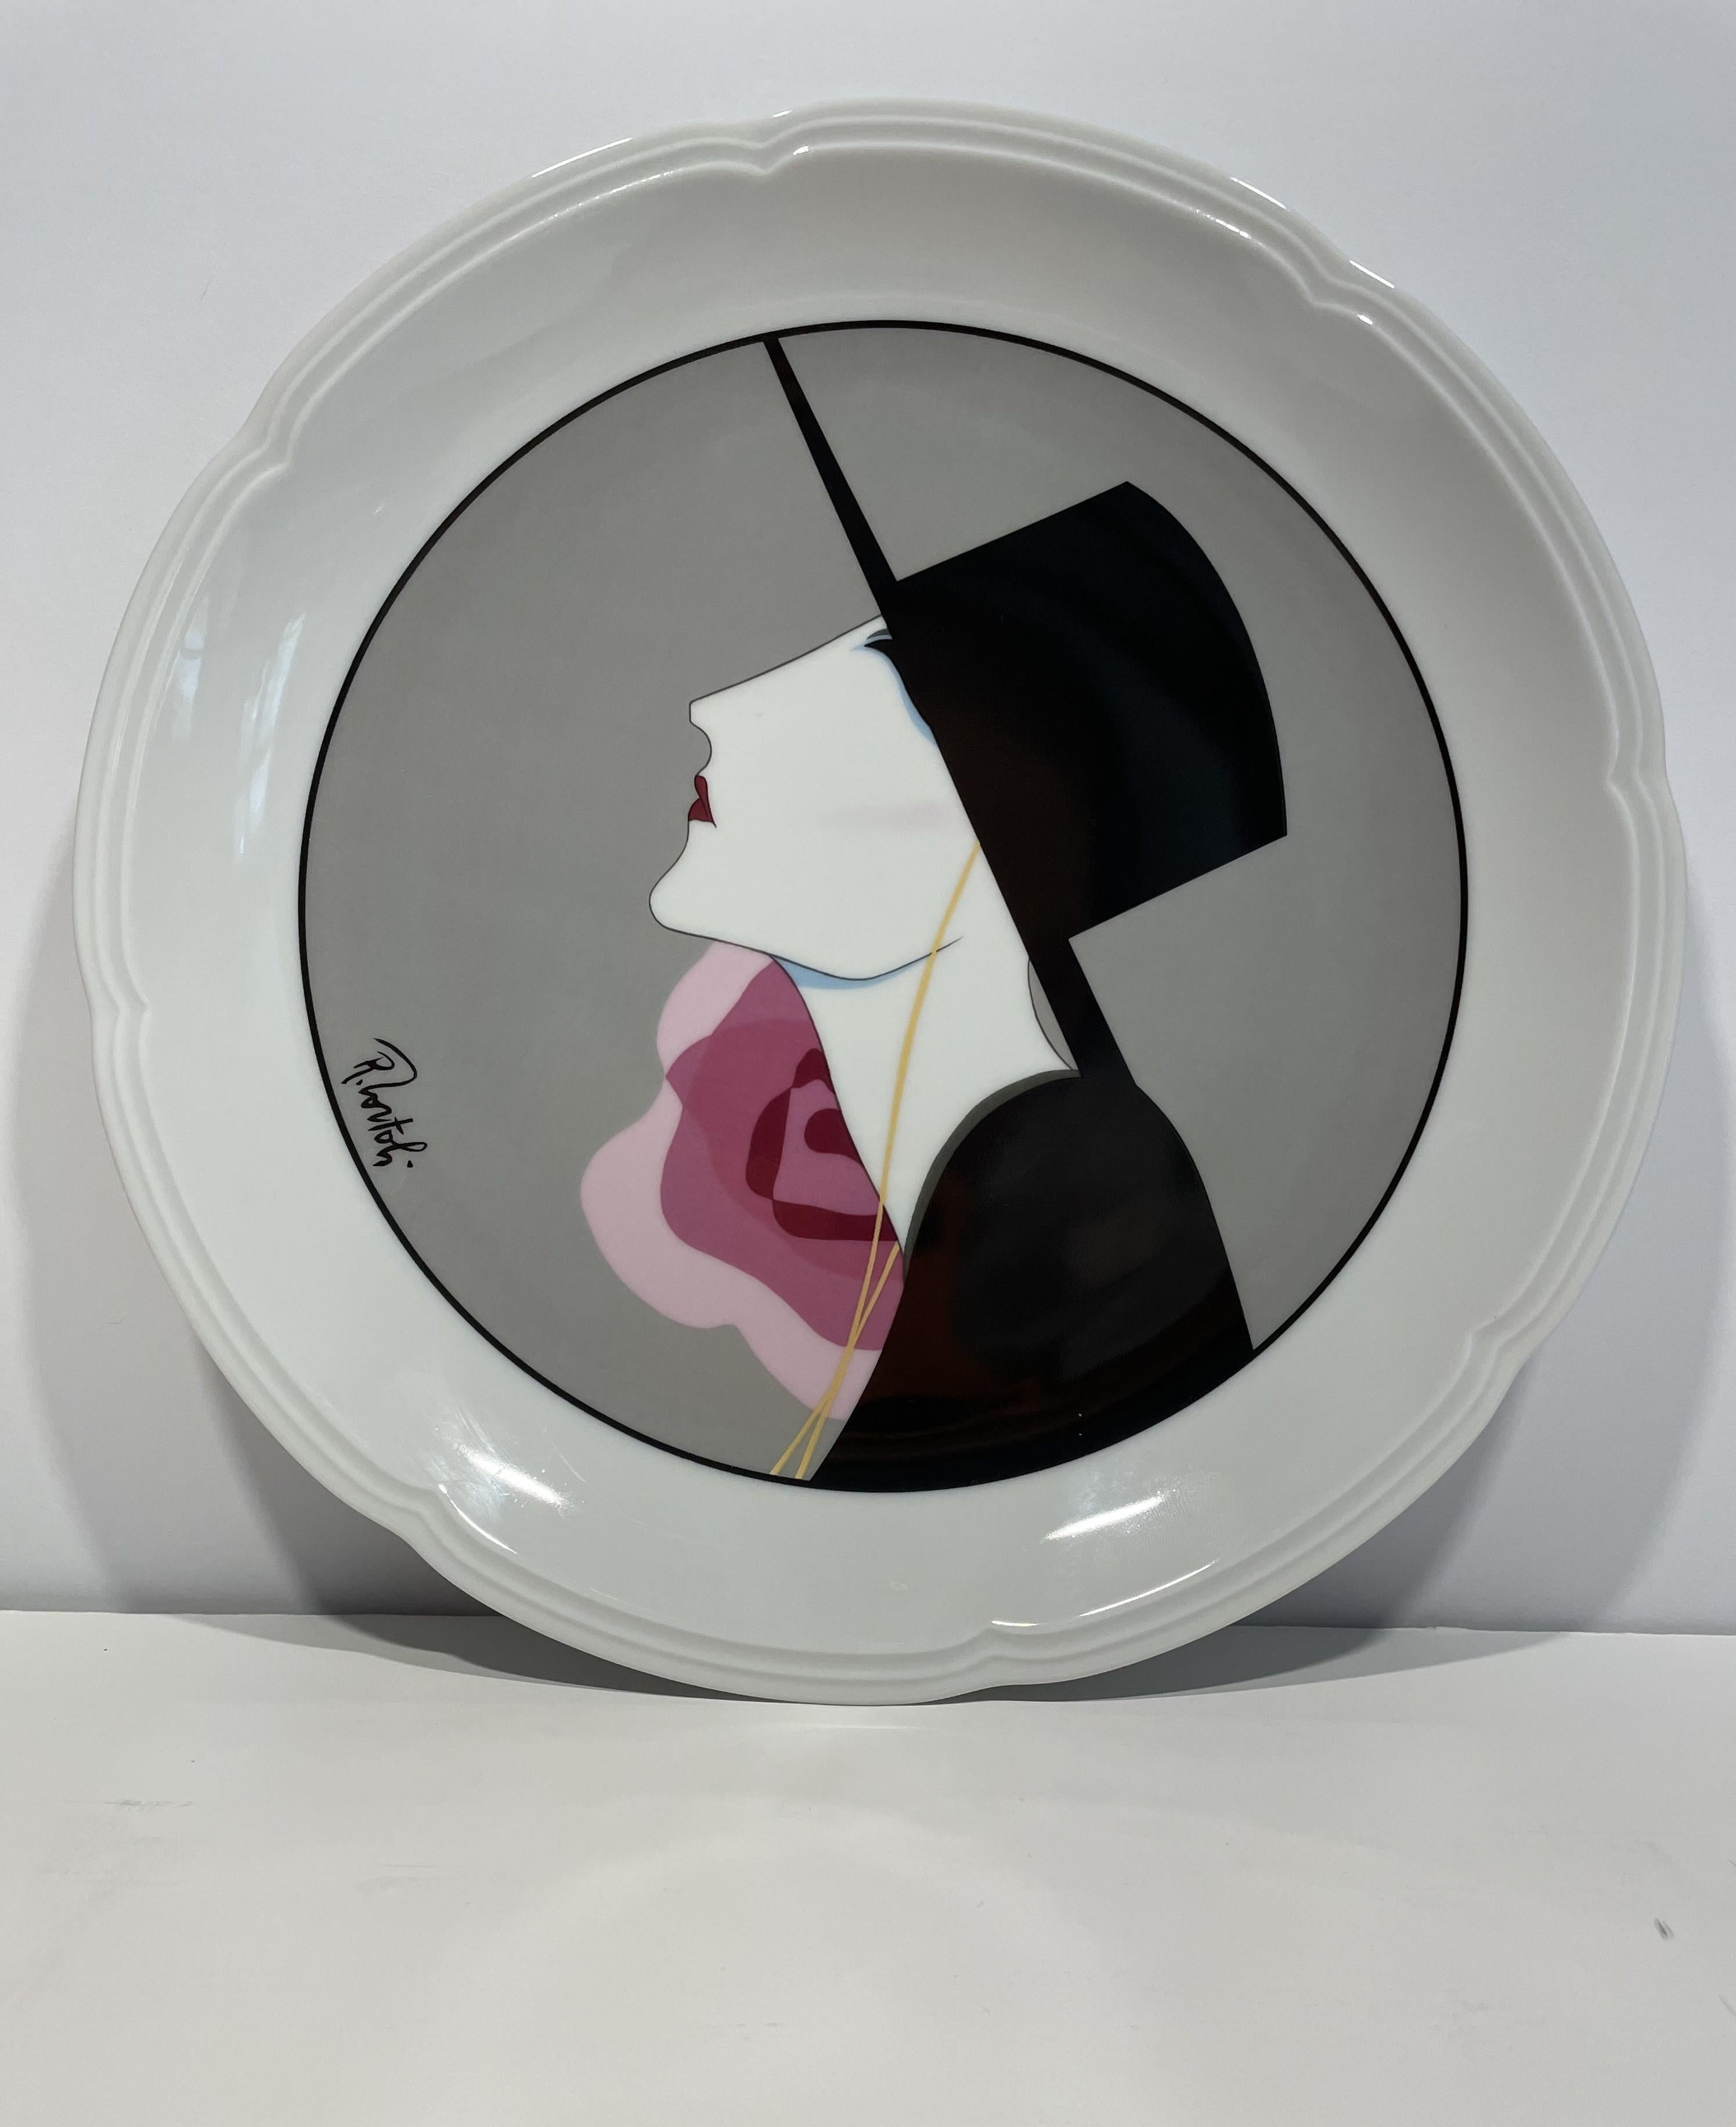 White French Porcelain Art Deco Dinner or Desert Plates - Set of 4 In Excellent Condition For Sale In Austin, TX